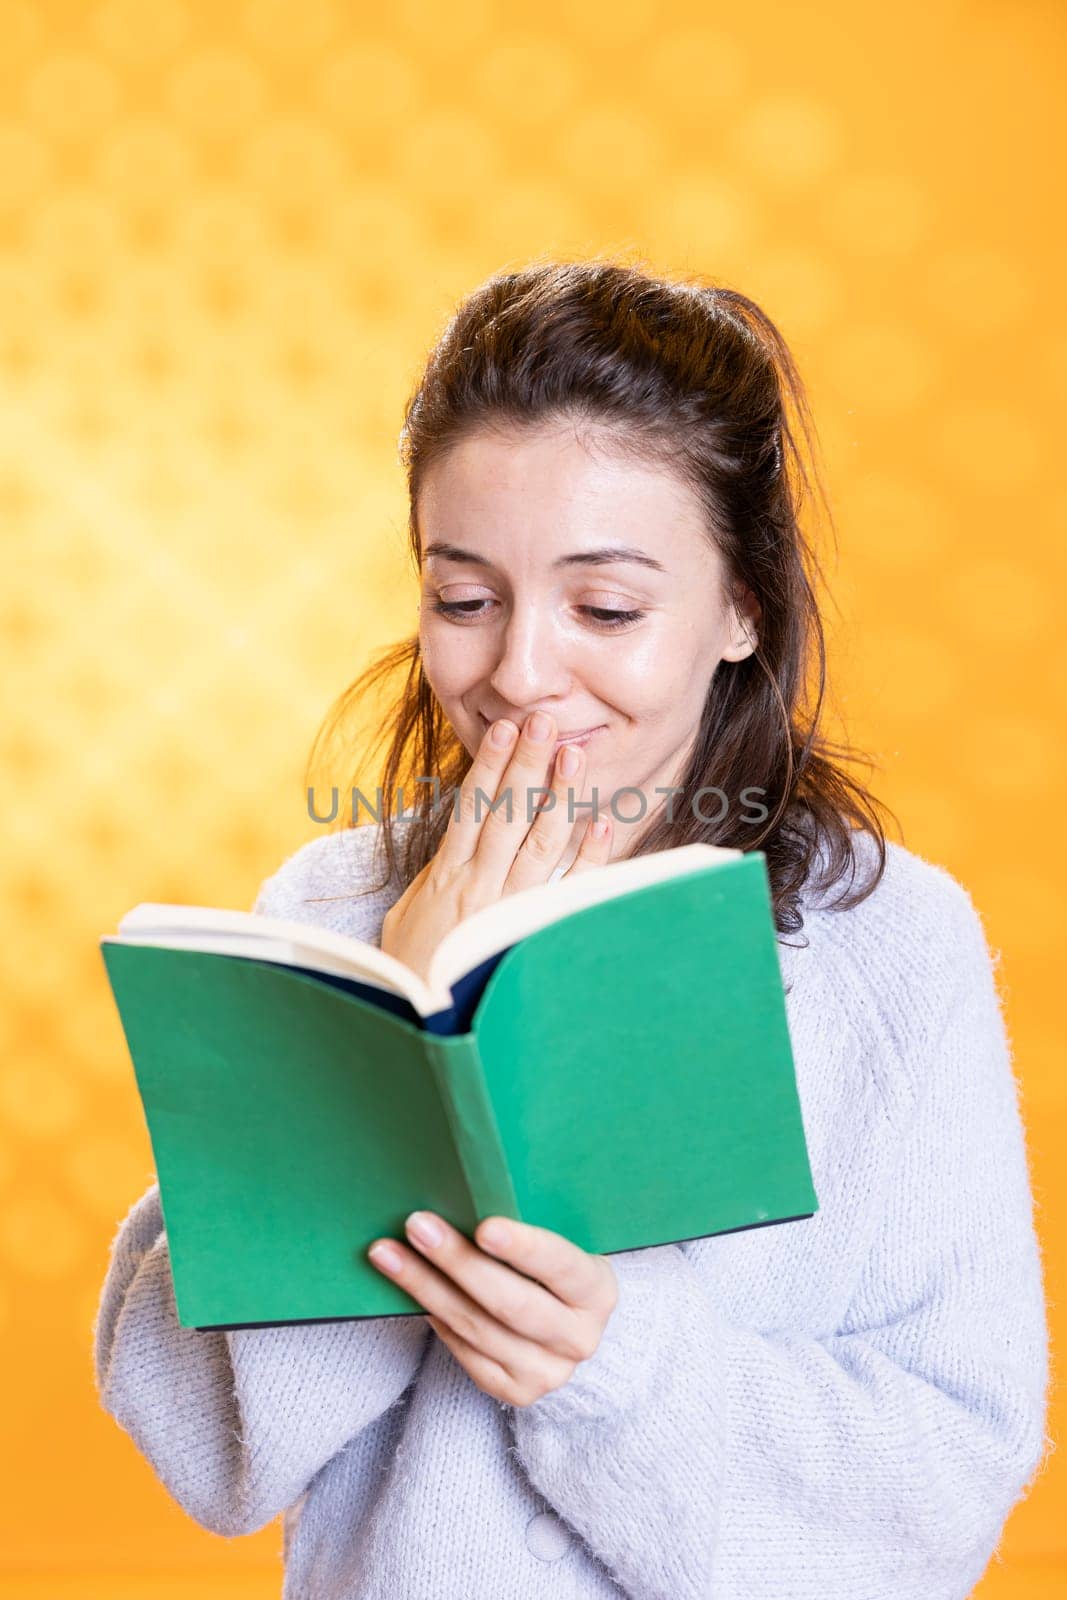 Woman amused by funny book, conveying joy of reading concept, isolated over studio background. Geek enjoying comical novel, giggling at jokes, showing appreciation for literature